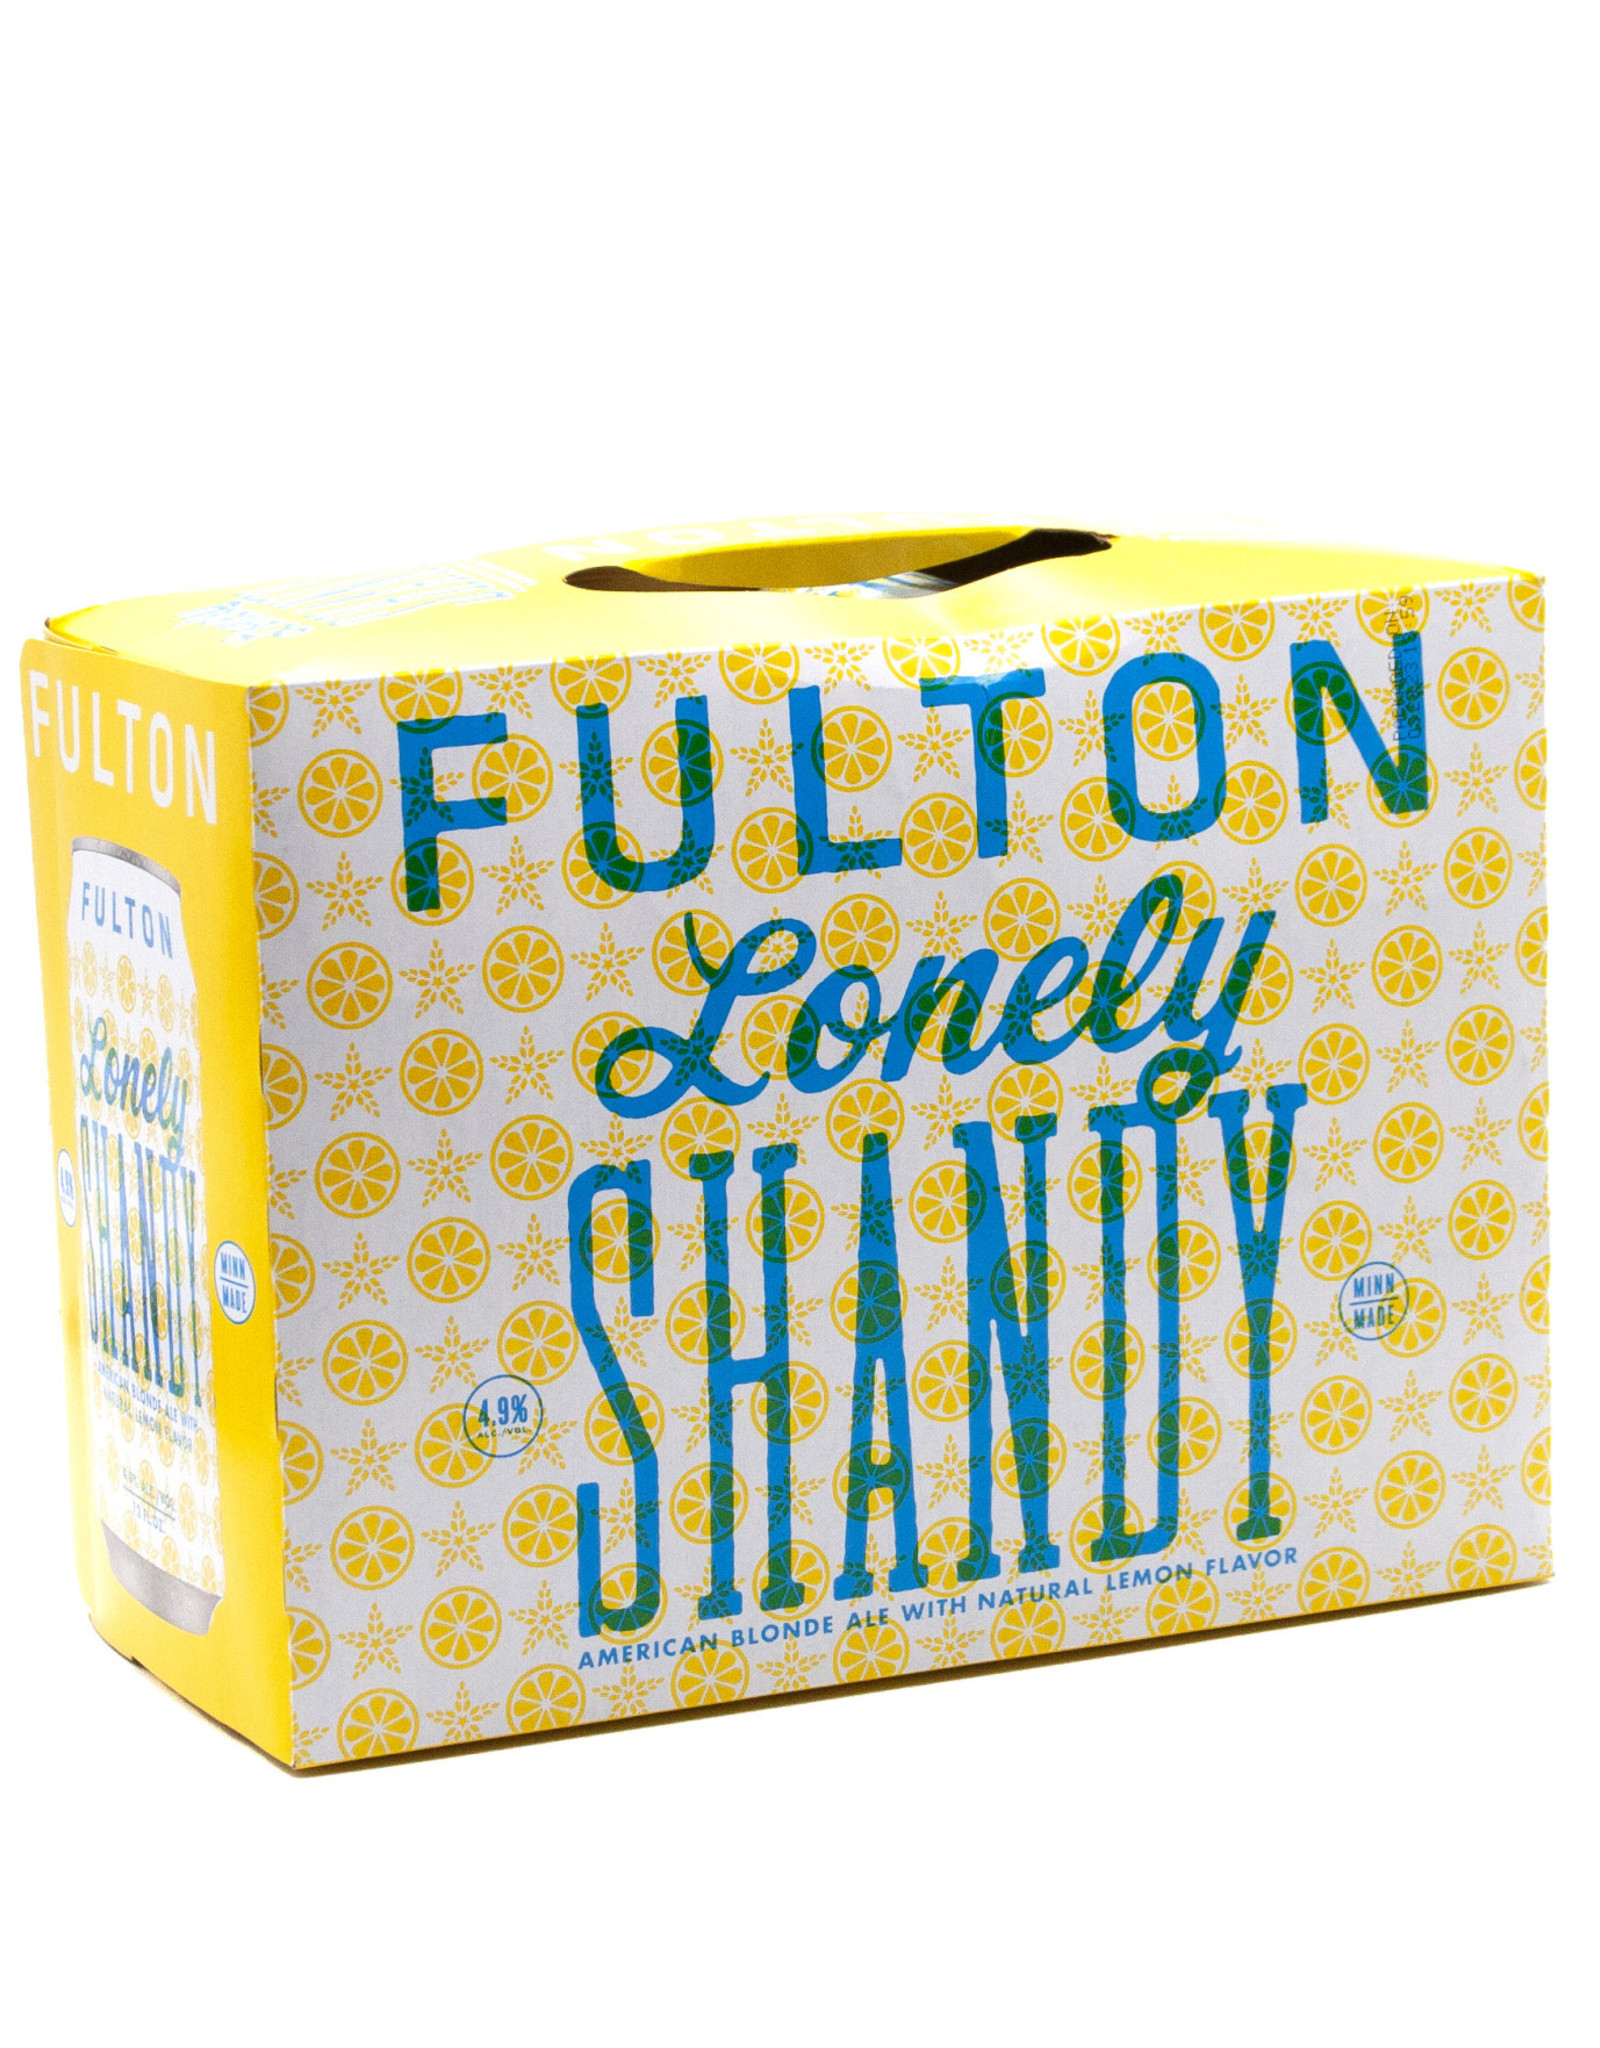 Fulton Lonely Blonde Shandy 12 Pack